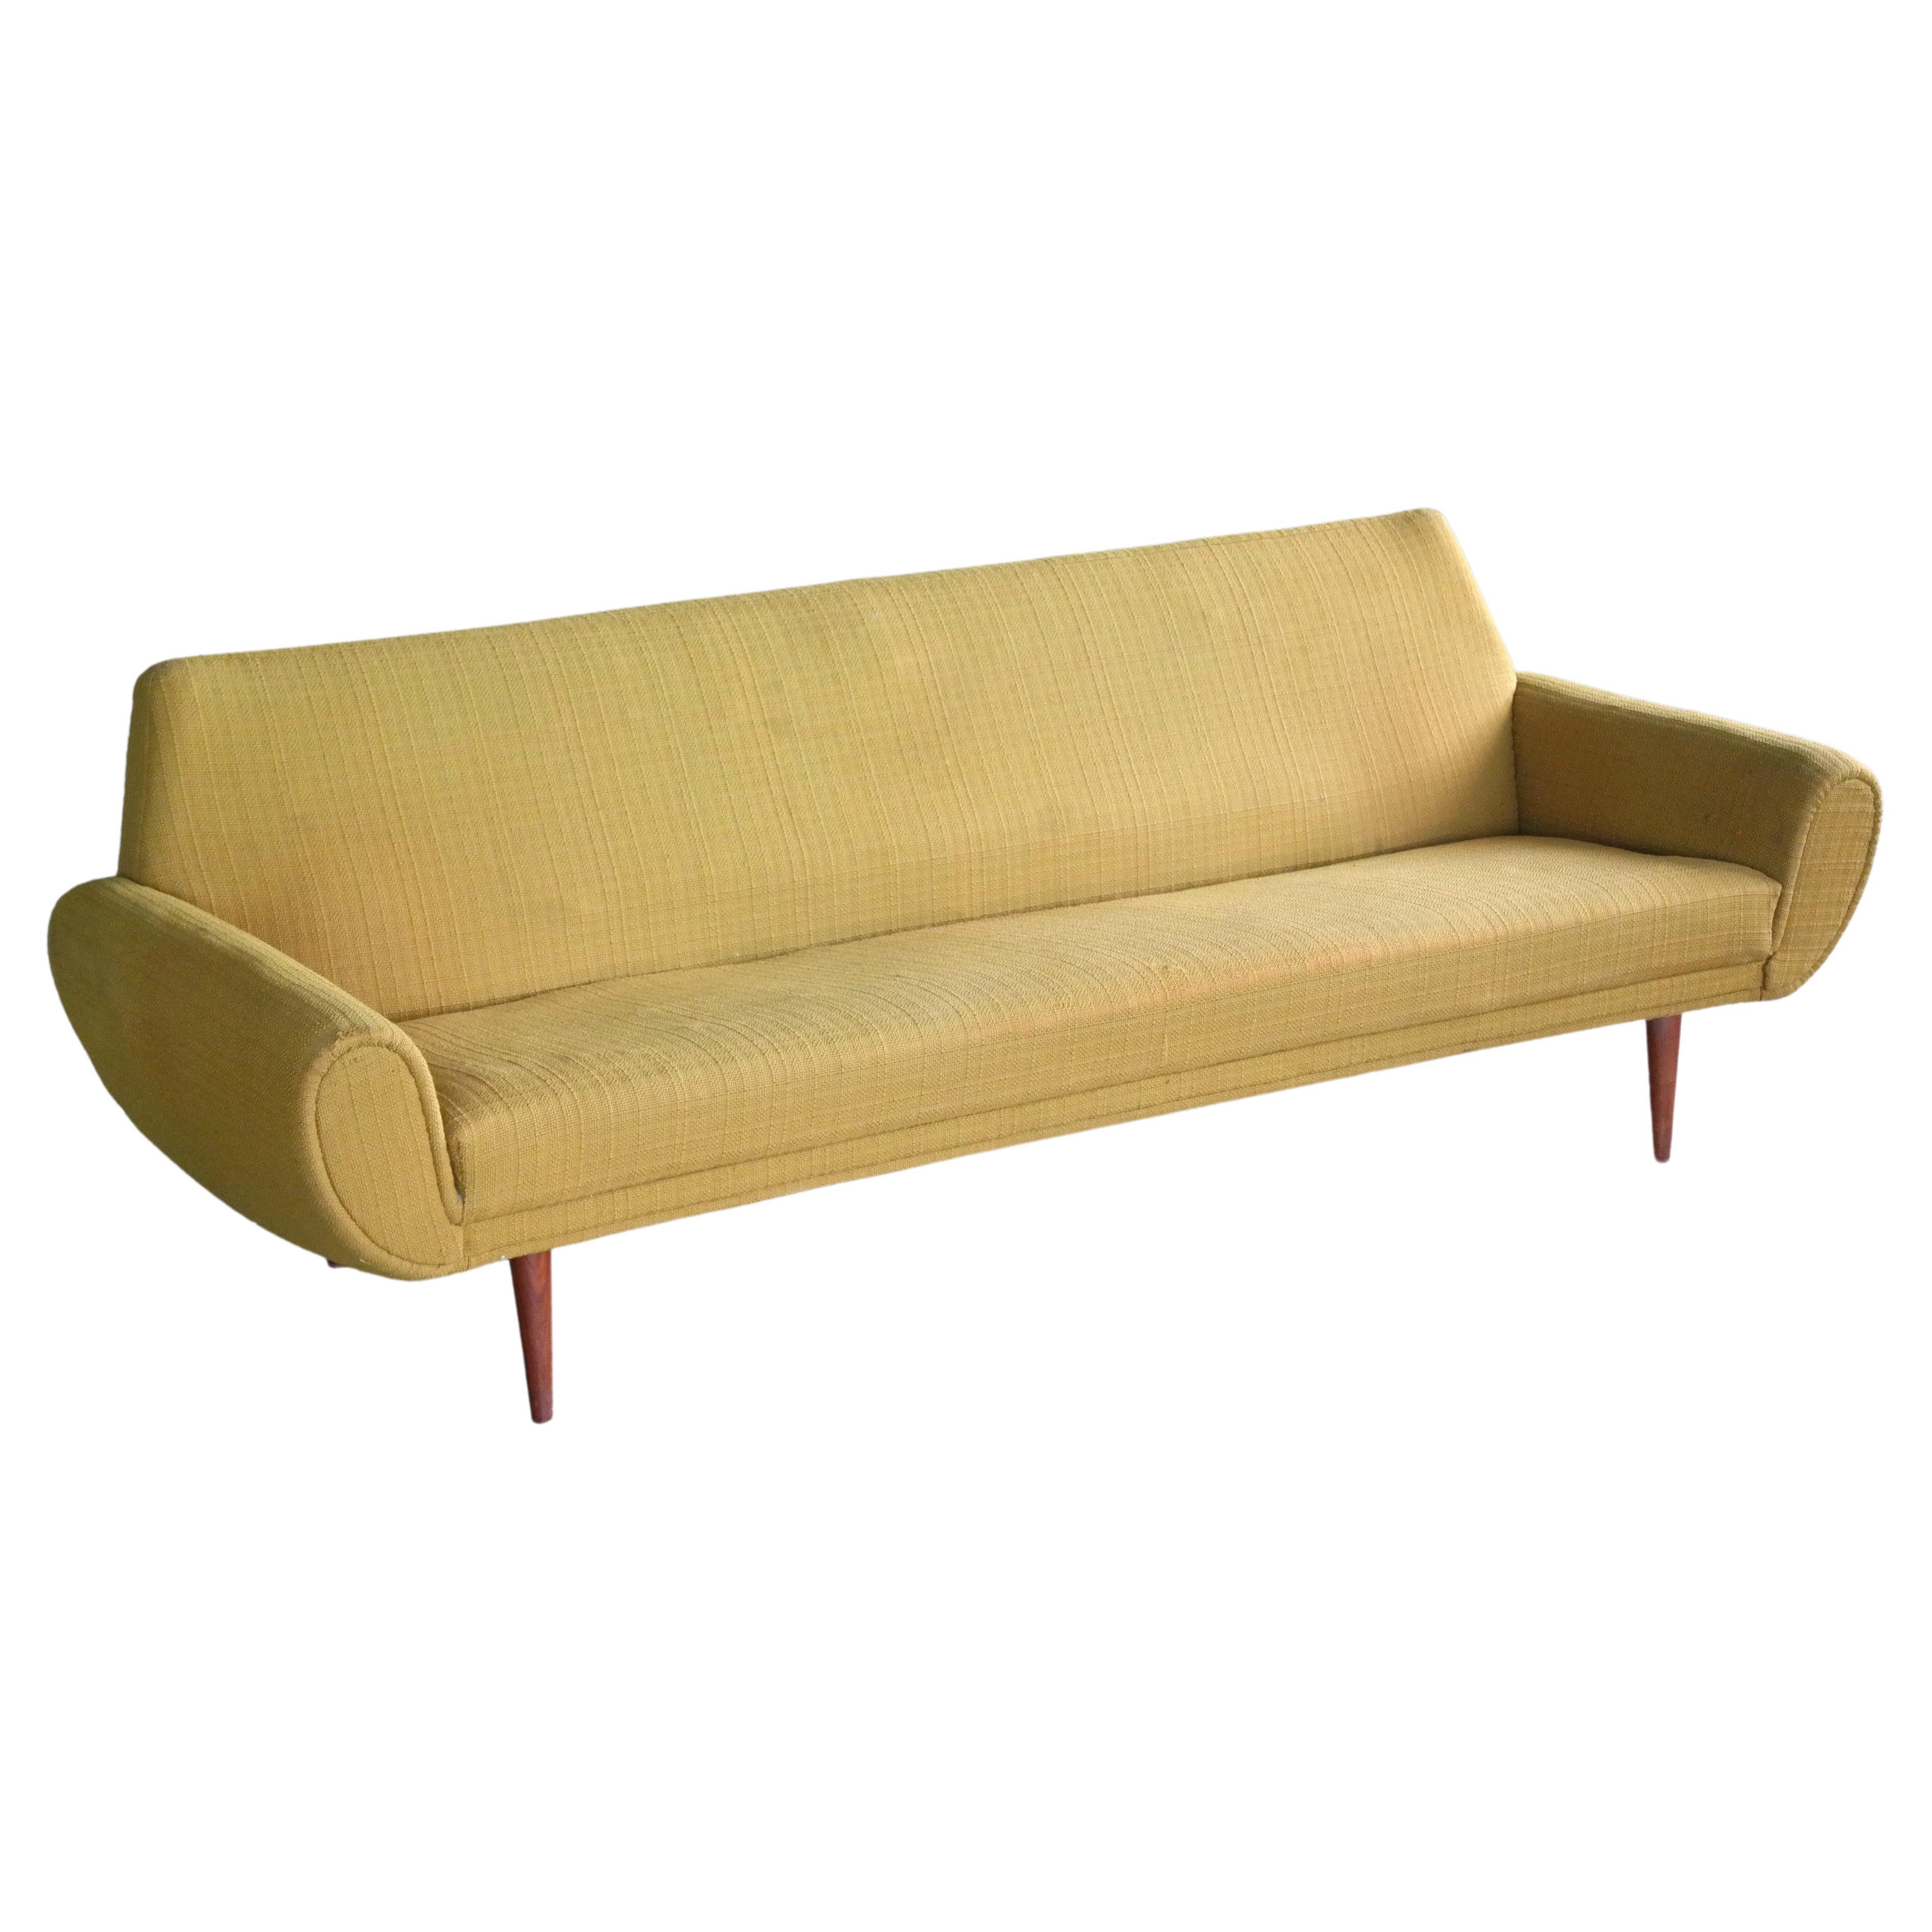 Midcentury Danish Modern 3-Seat Sofa in Teak and Wool by Kurt Ostervig For Sale